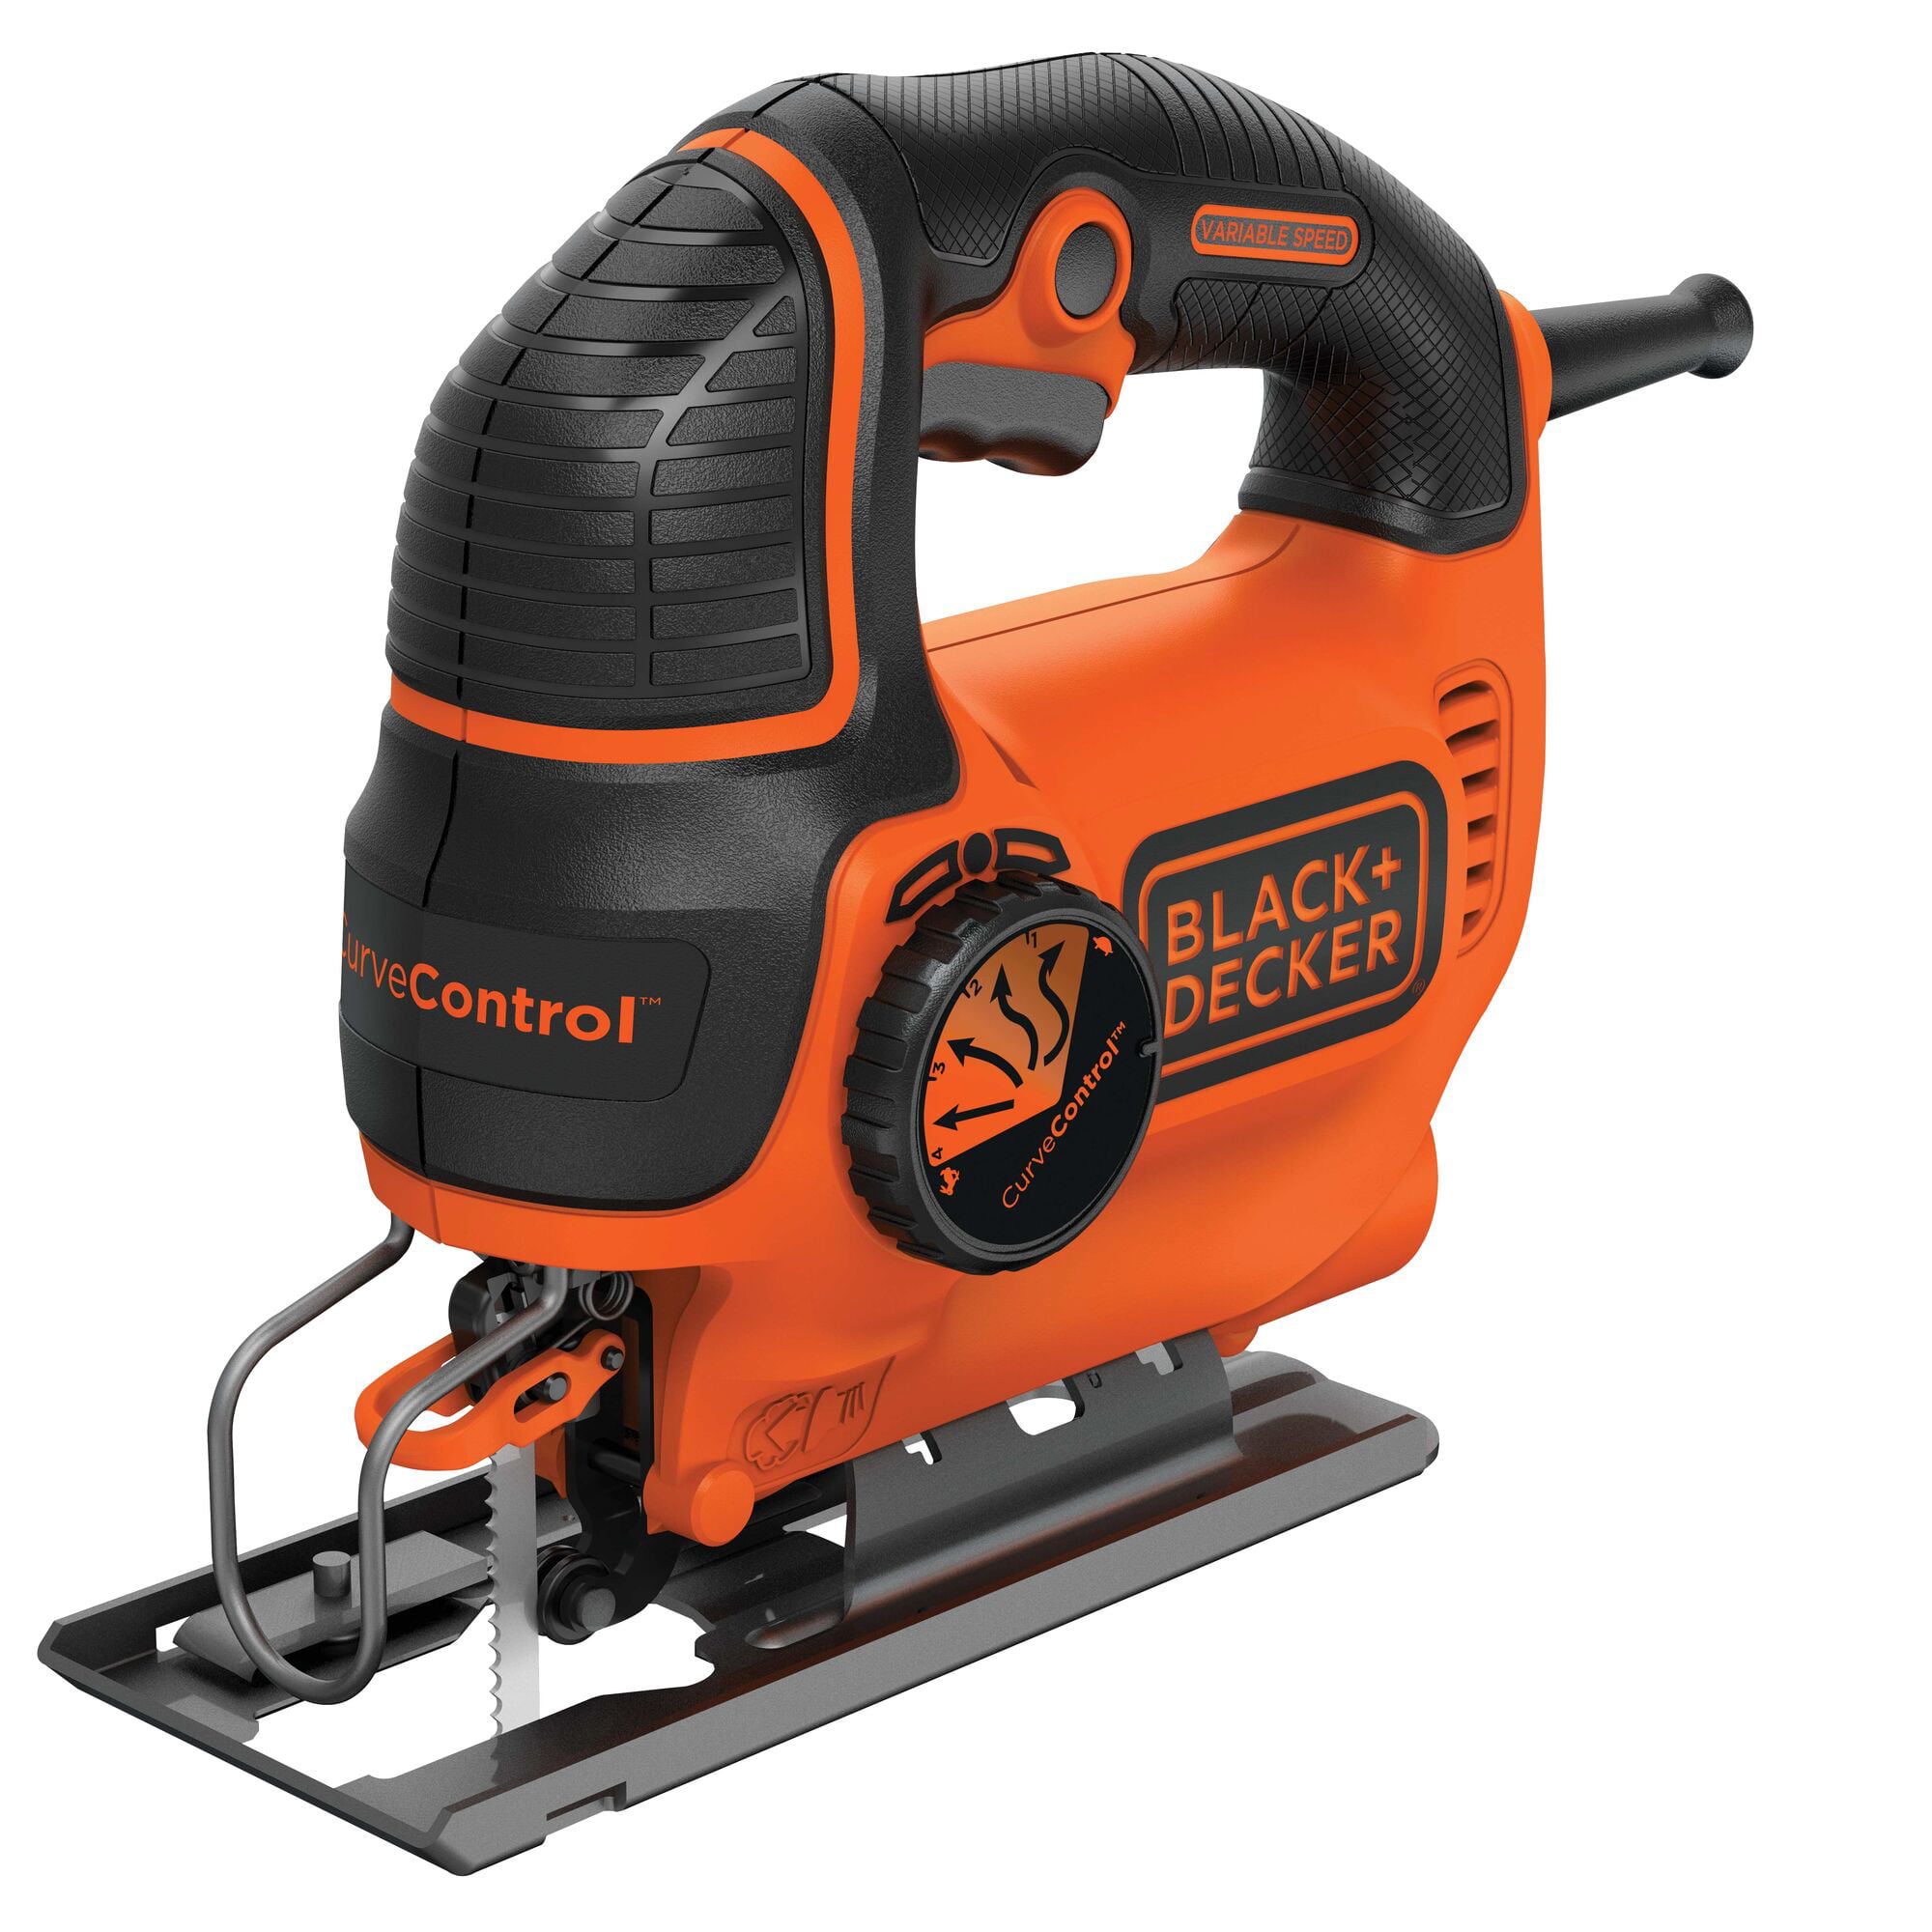 How to Change the Blade on a Black & Decker Jigsaw